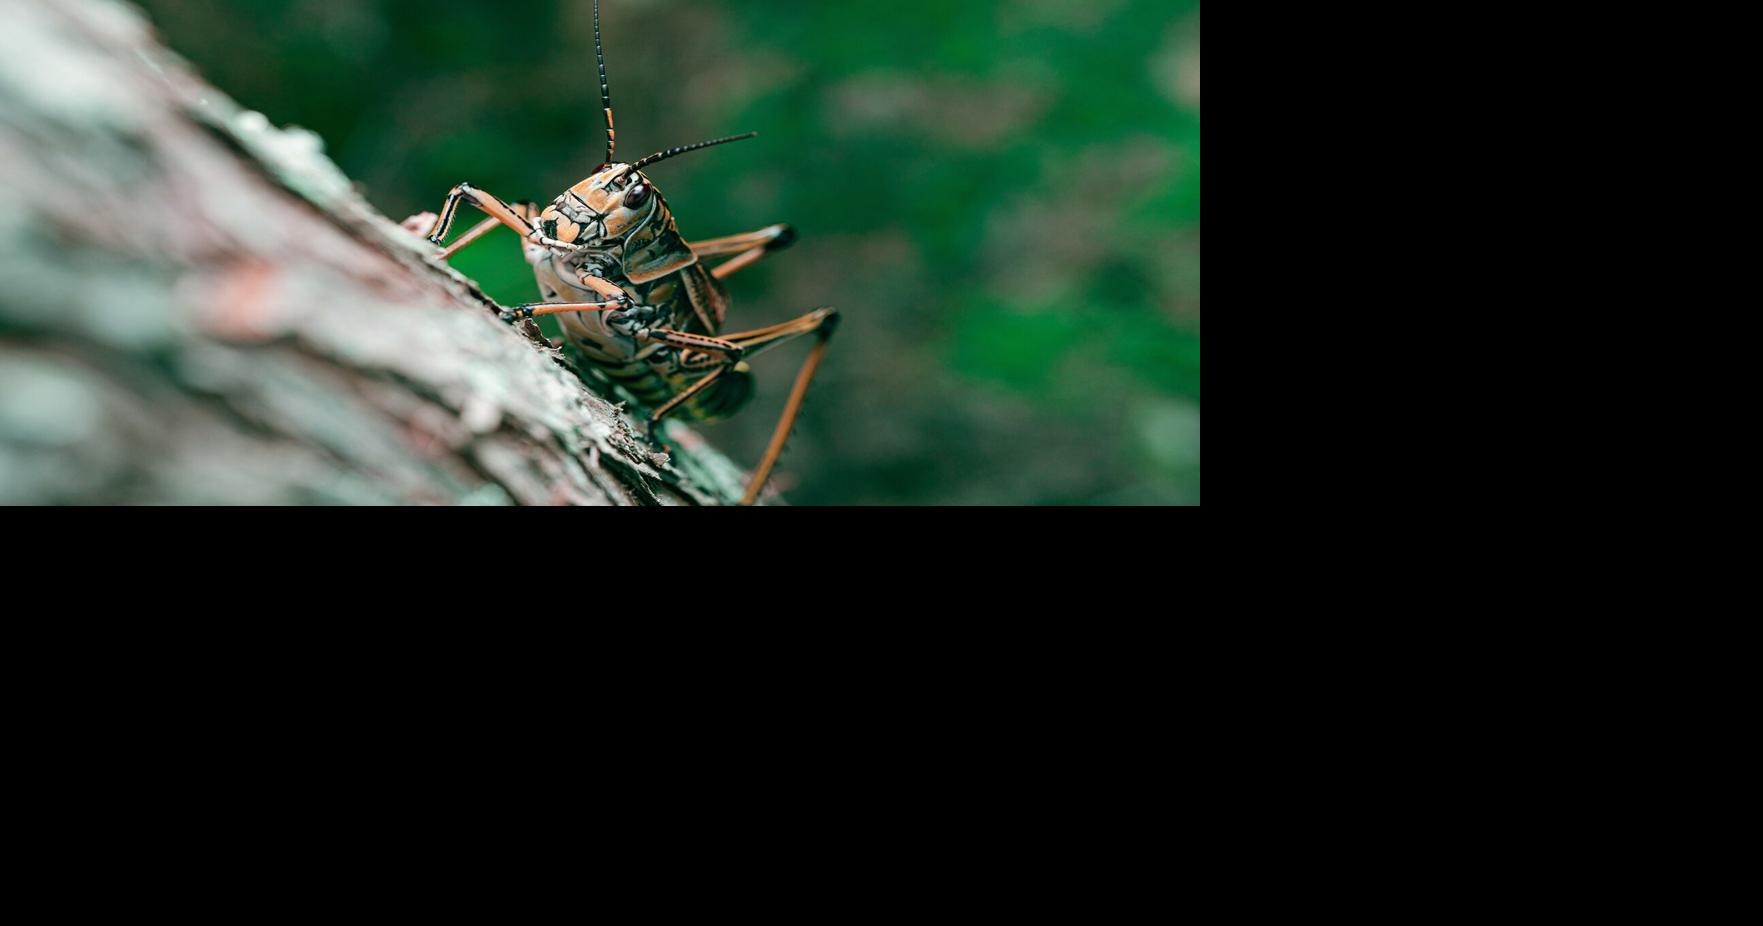 Working with grasshoppers. No grasshoppers will be harmed when